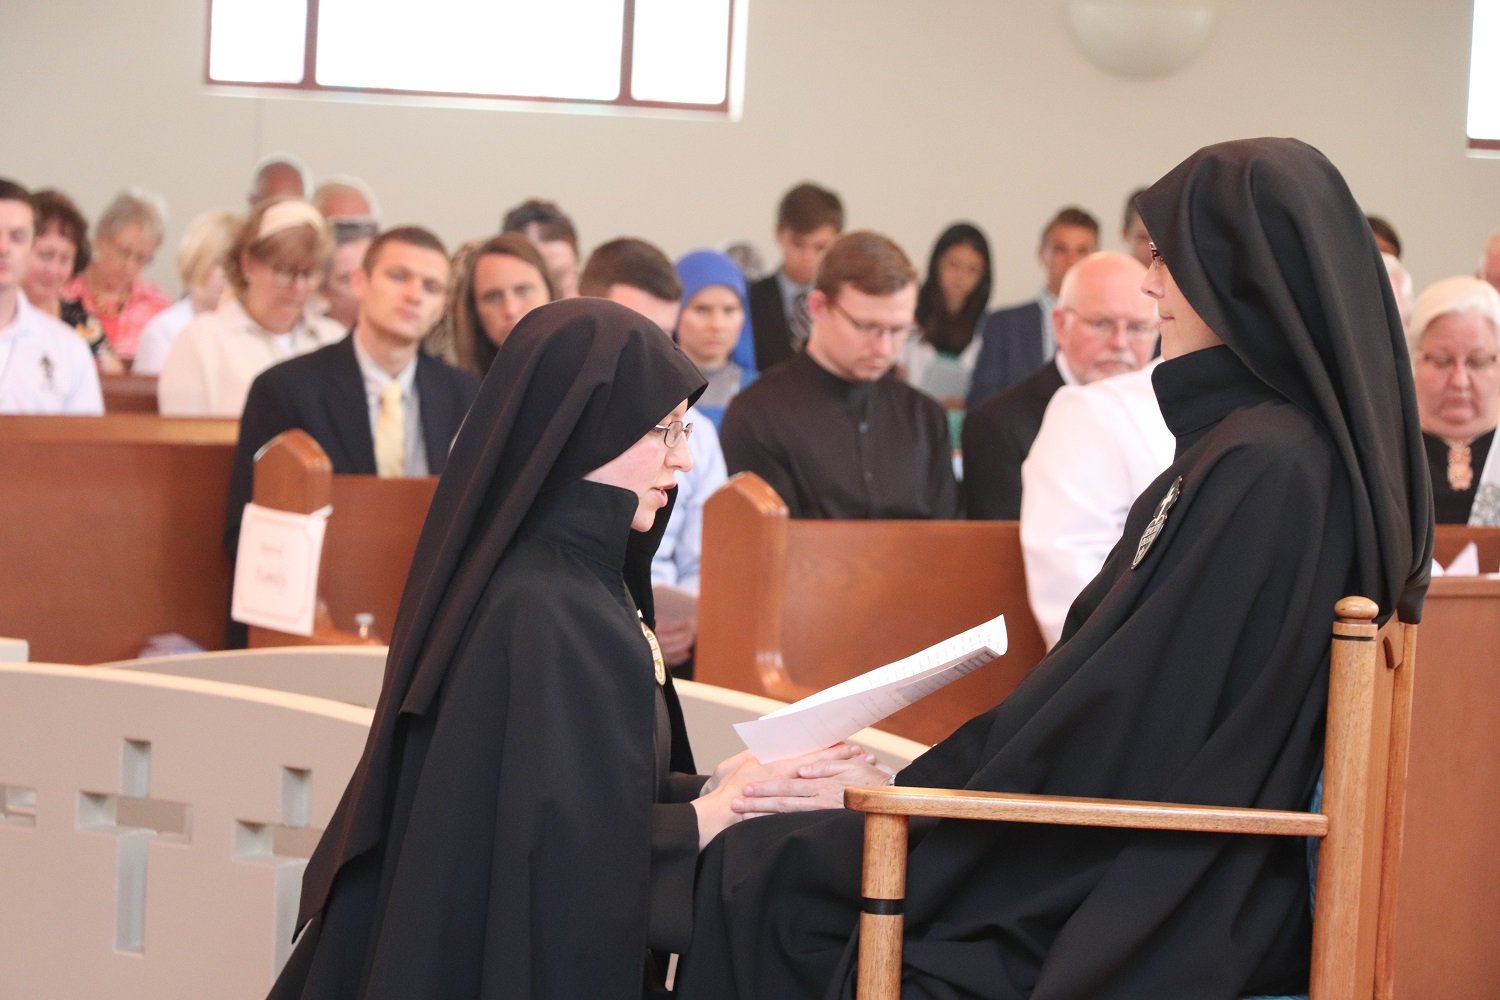  The Profession of Perpetual Vows in the hands of Mother John Mary. “To the honor of God, I, Sister Frances Marie of the Eucharistic Heart of Jesus …” 